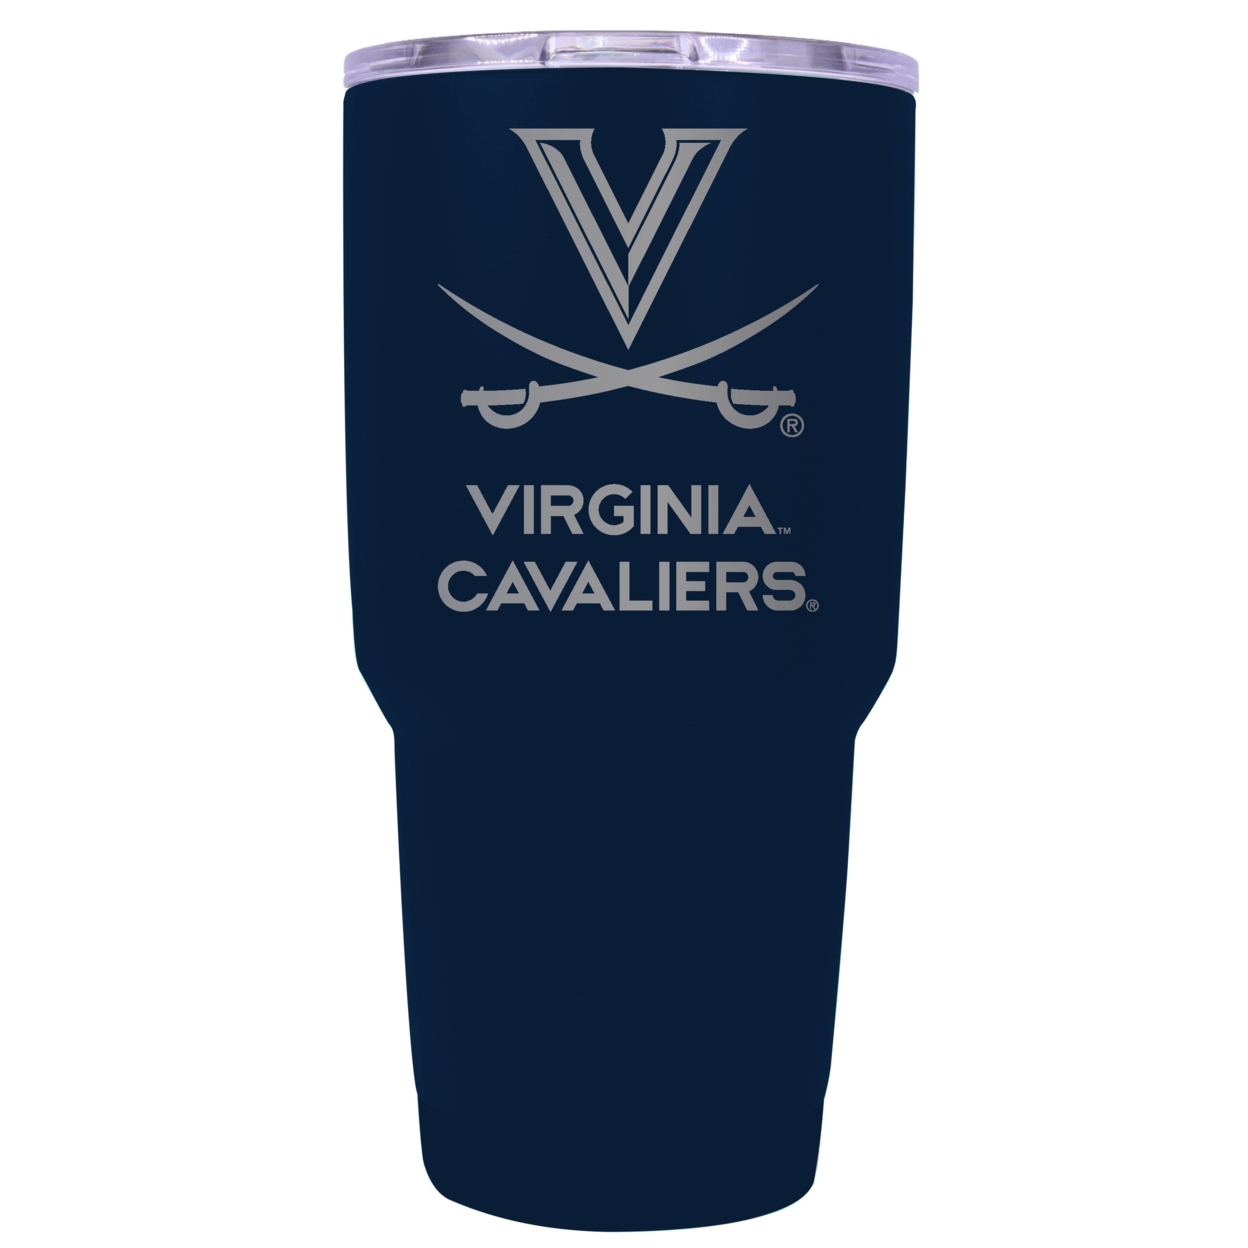 Virginia Cavaliers 24 Oz Laser Engraved Stainless Steel Insulated Tumbler - Choose Your Color. - Navy